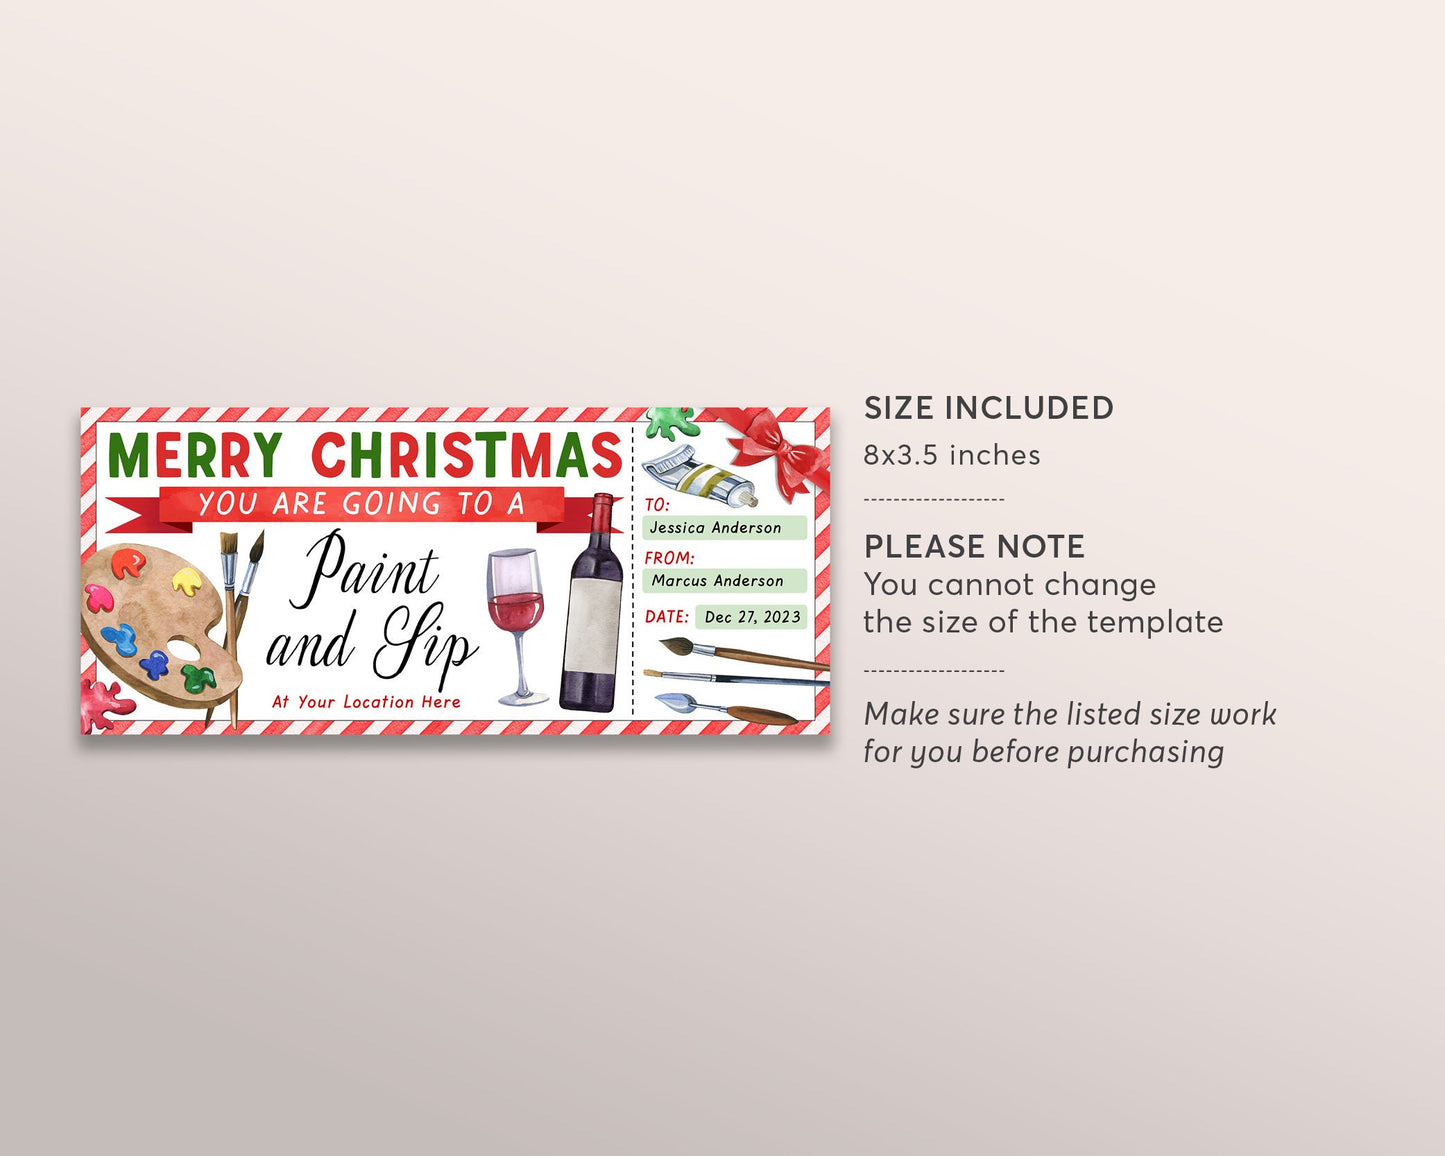 Paint And Sip Class Christmas Gift Certificate Ticket Editable Template, Surprise Painting Experience Art Lessons Date Night Voucher Wine